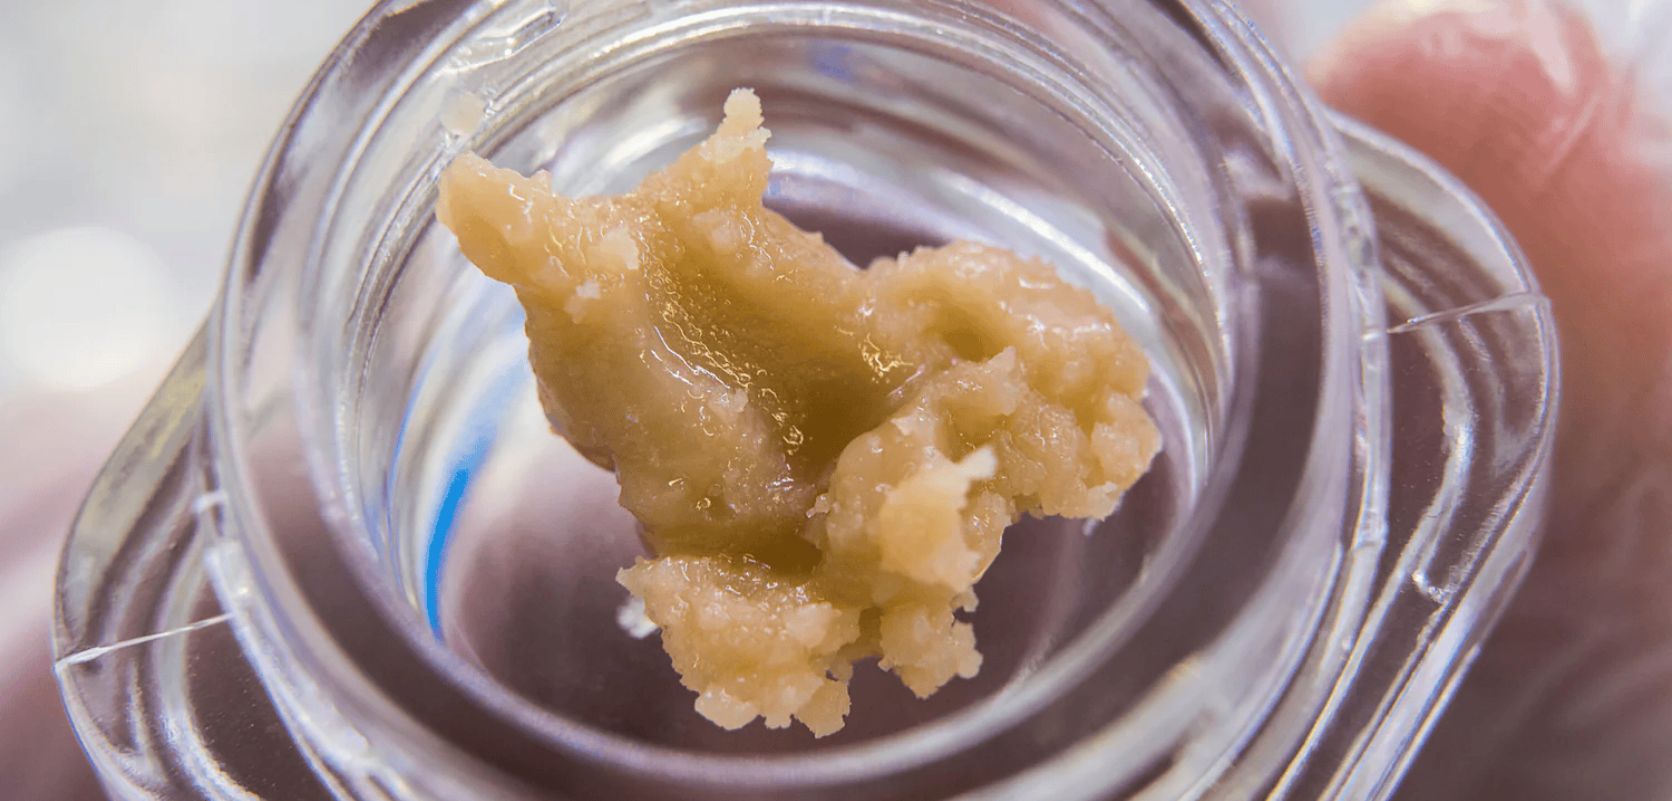 While Butane Hash Oil (BHO) involves blasting cannabis with chemicals like butane, propane, or hexane to release trichomes, Rosin takes a simpler route. 